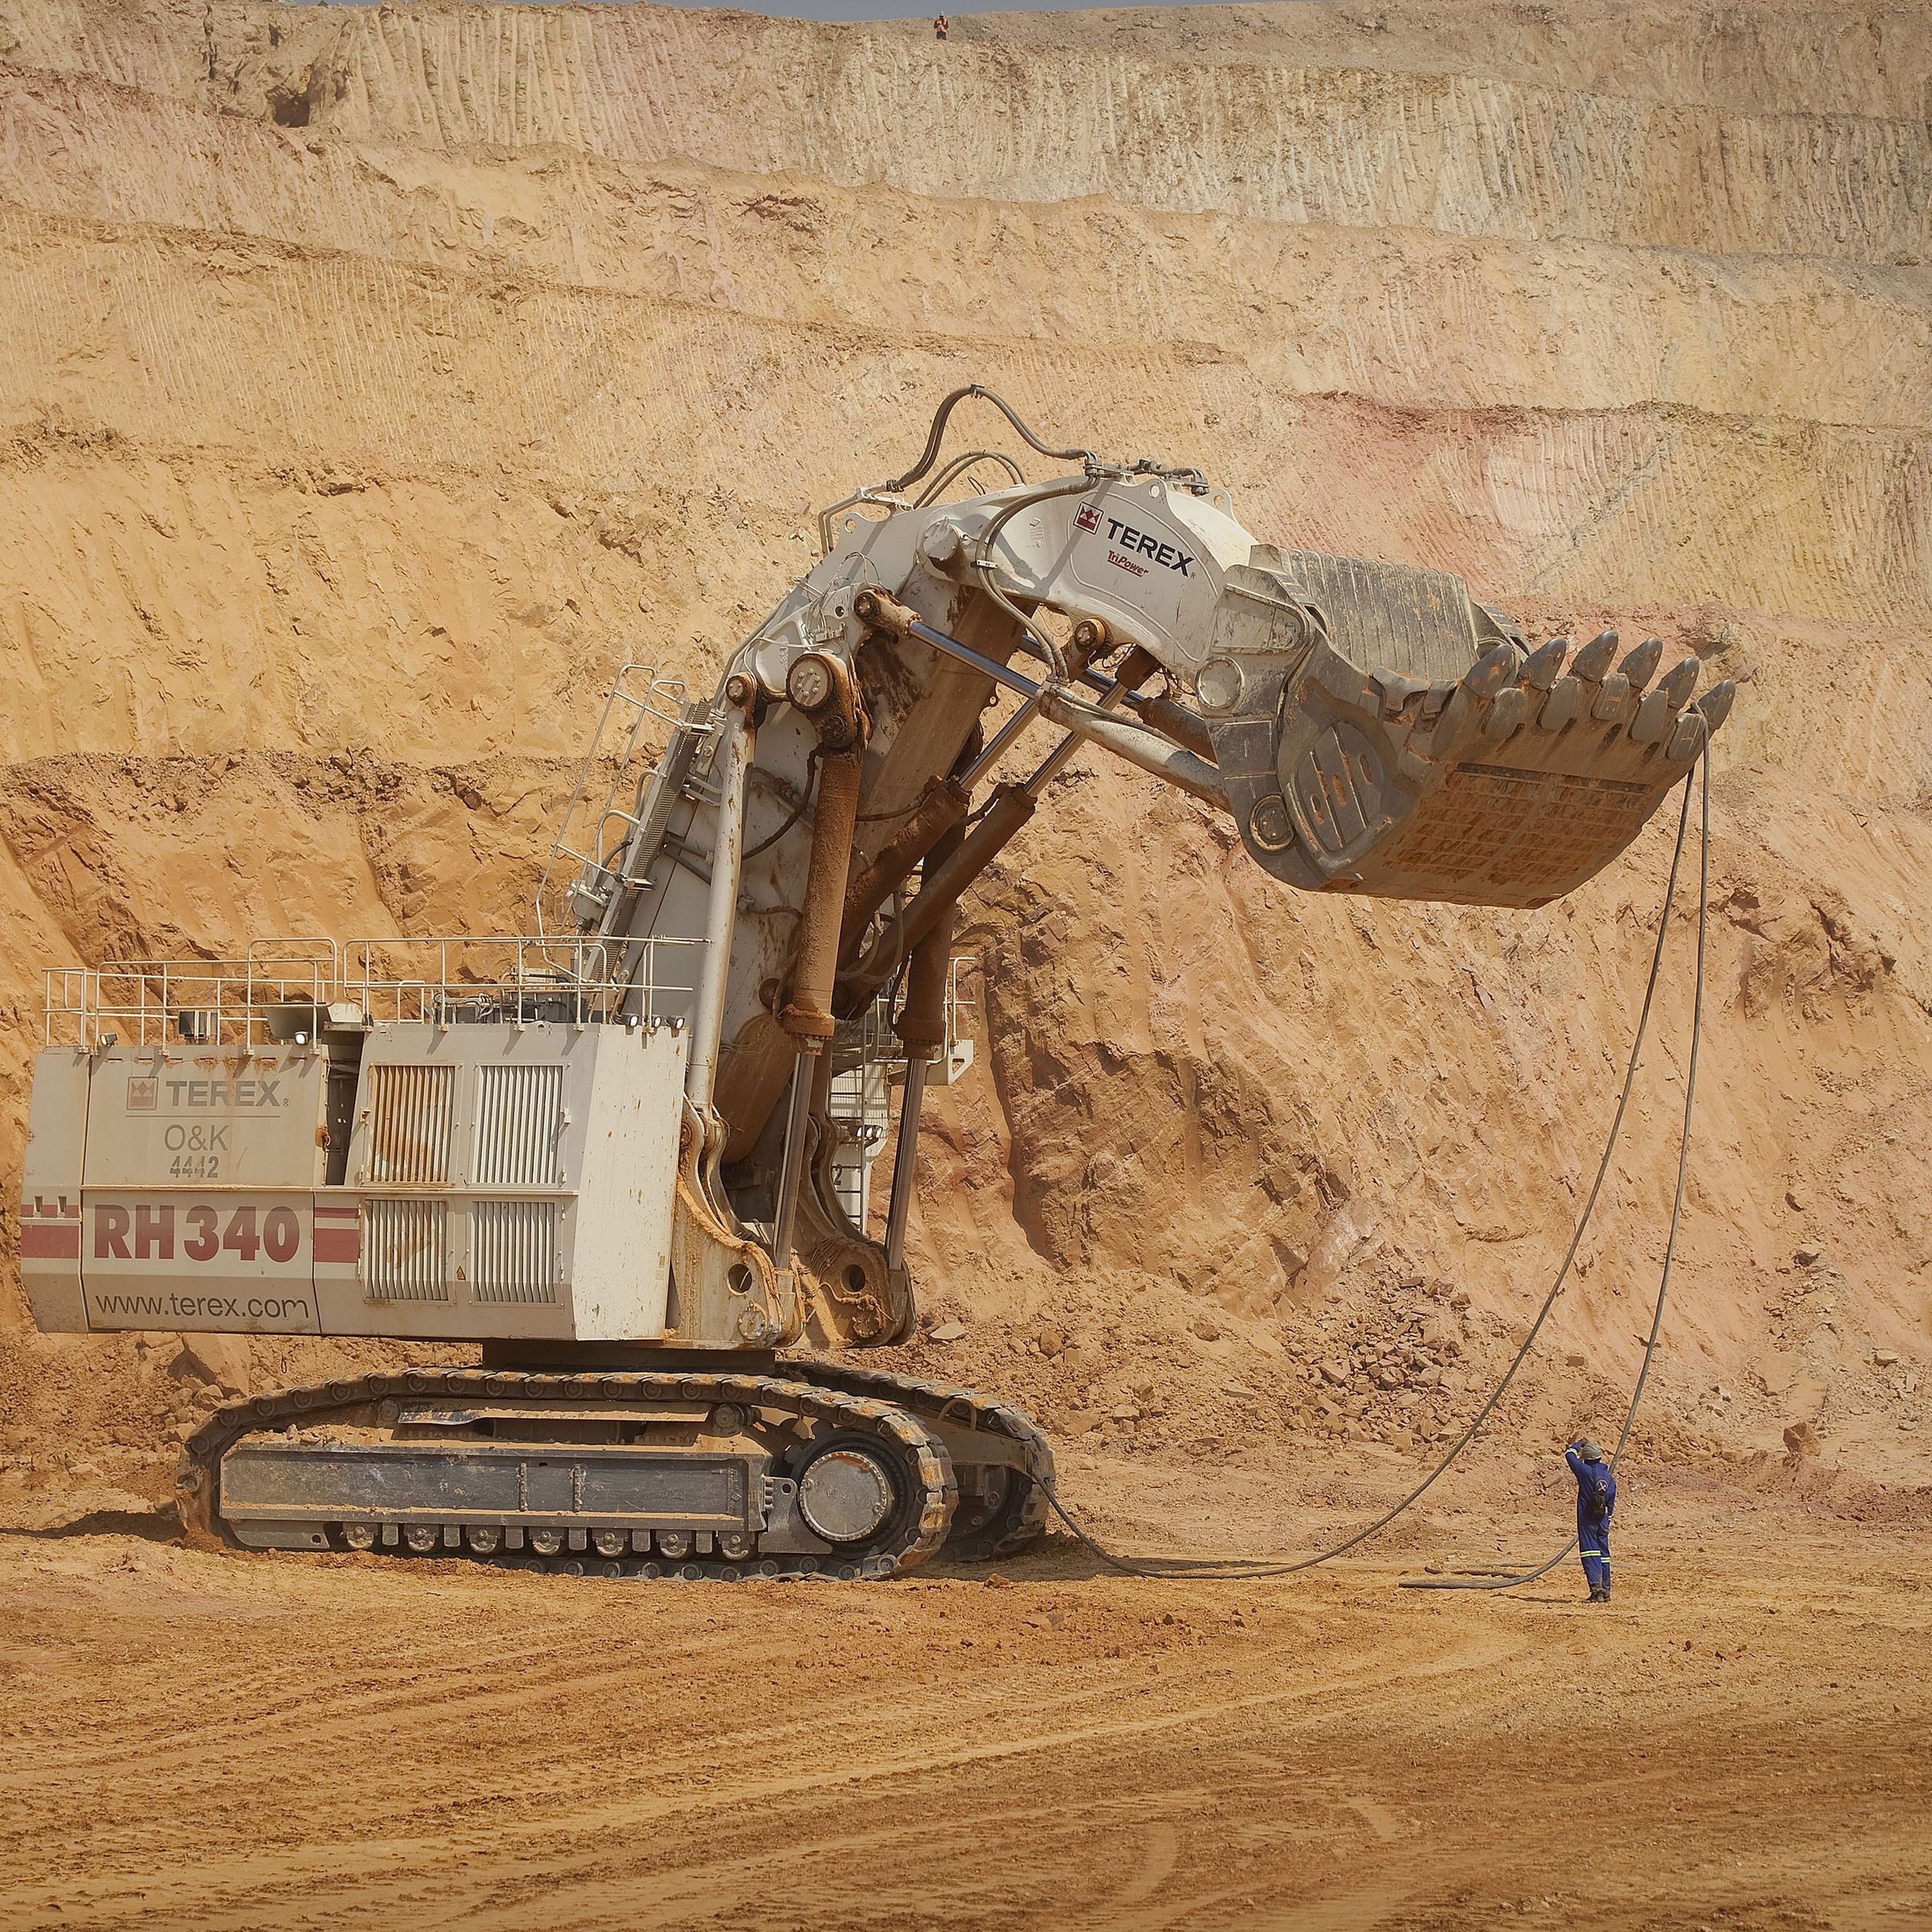 A person stands next to a giant mining excavator in an open pit mine.